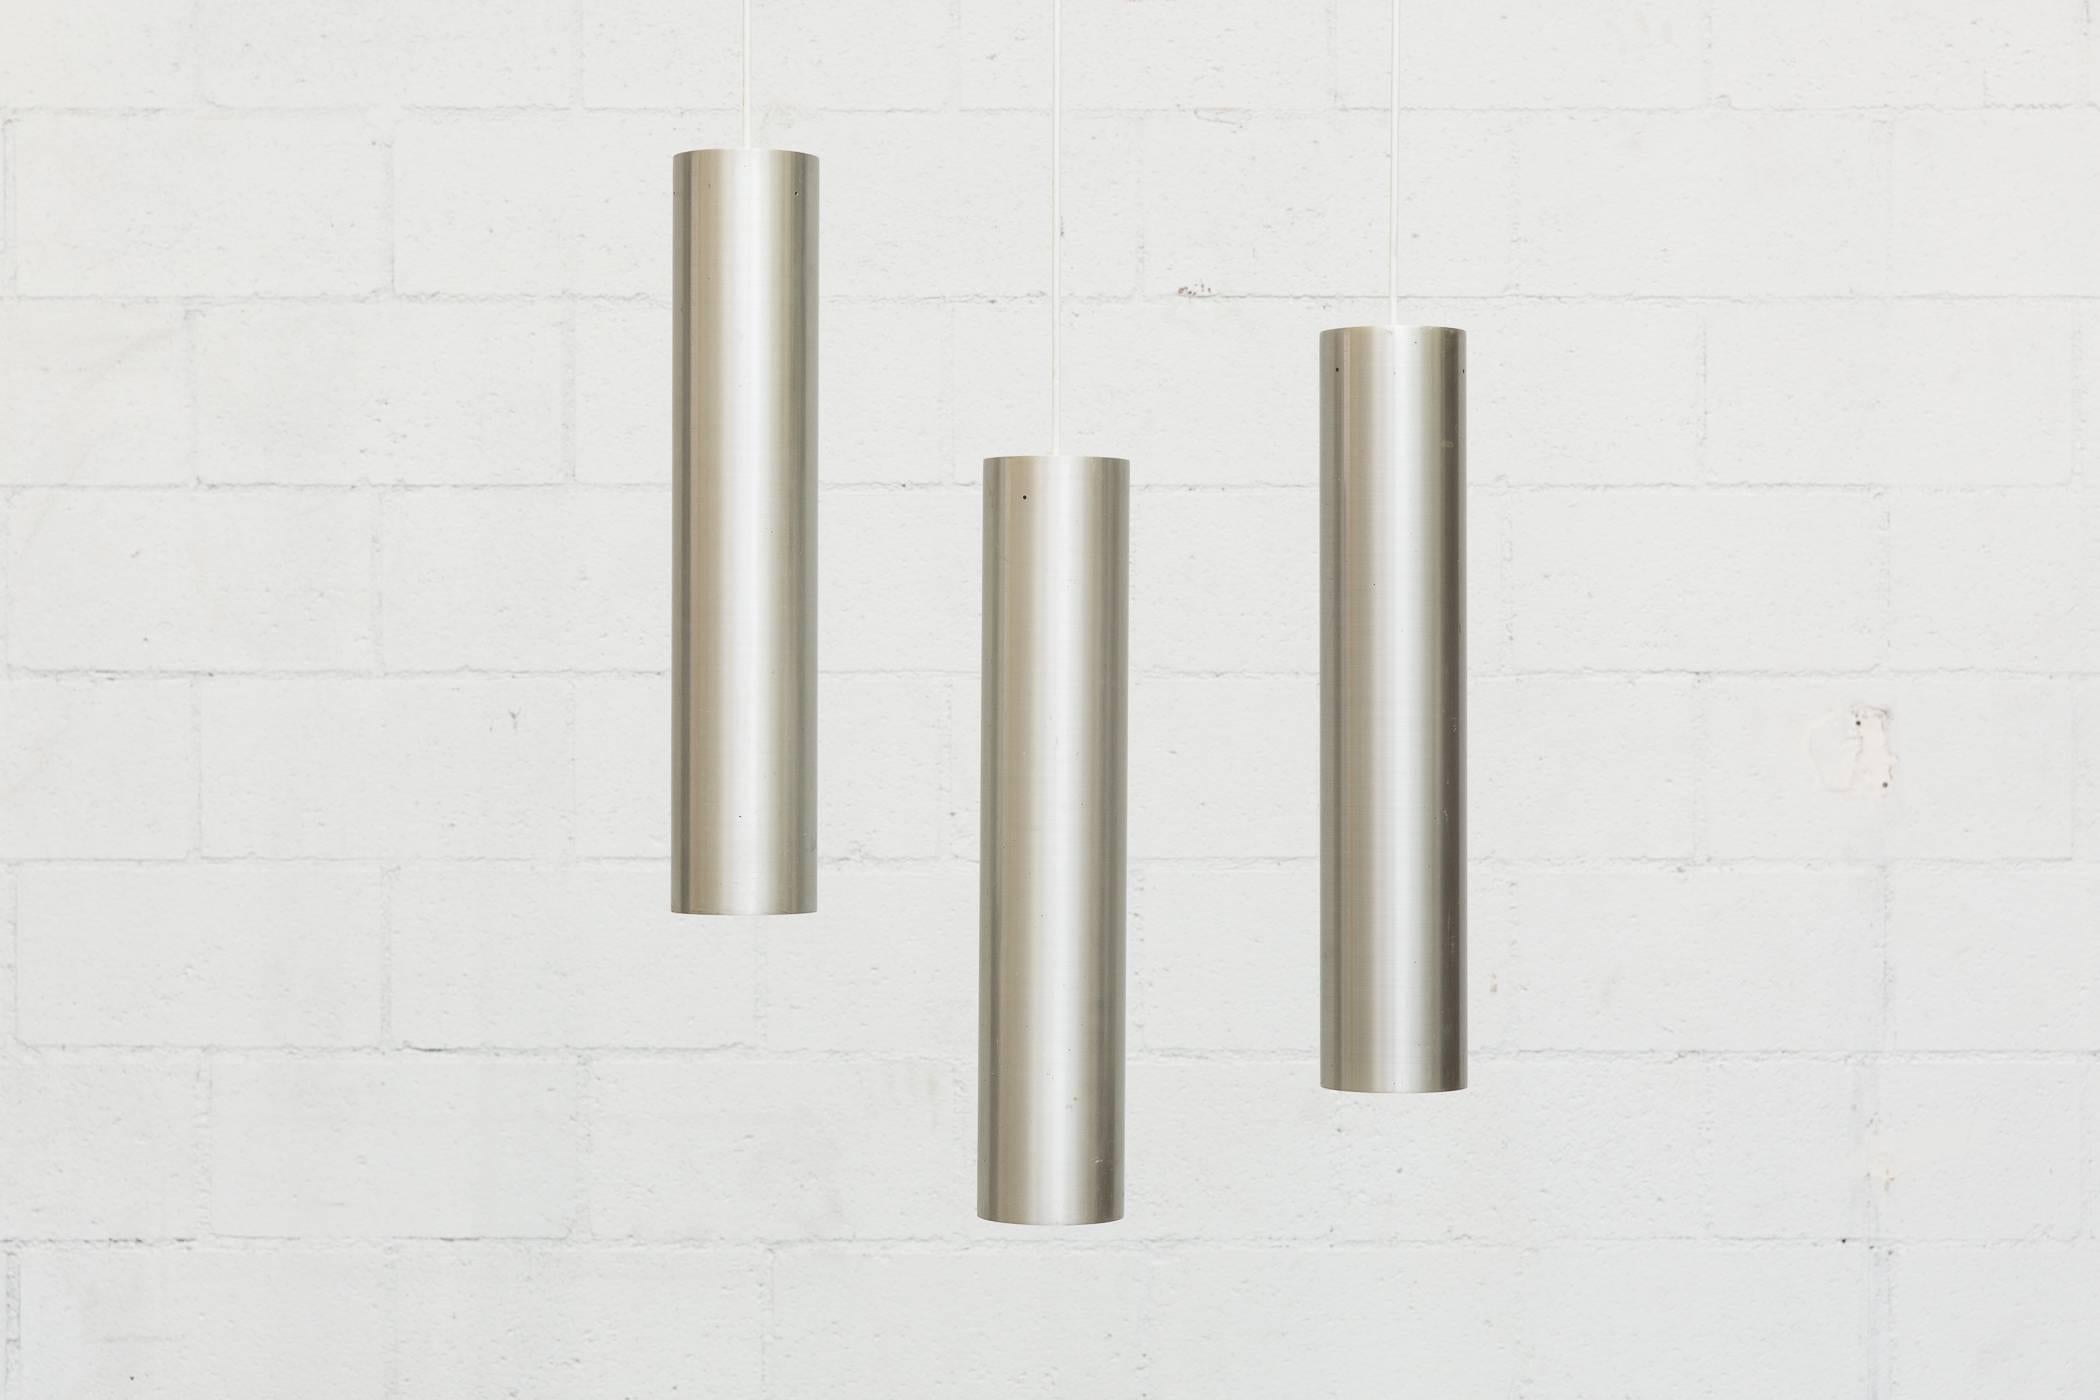 1960s Mid-Century set of three elongated brushed aluminum tubular pendants. Manufactured by renowned Dutch lighting company Raak Lichtarchitectuur out of Amsterdam. Founded in 1954 by Carel O. Lockhorn (who originally worked for Philips) the